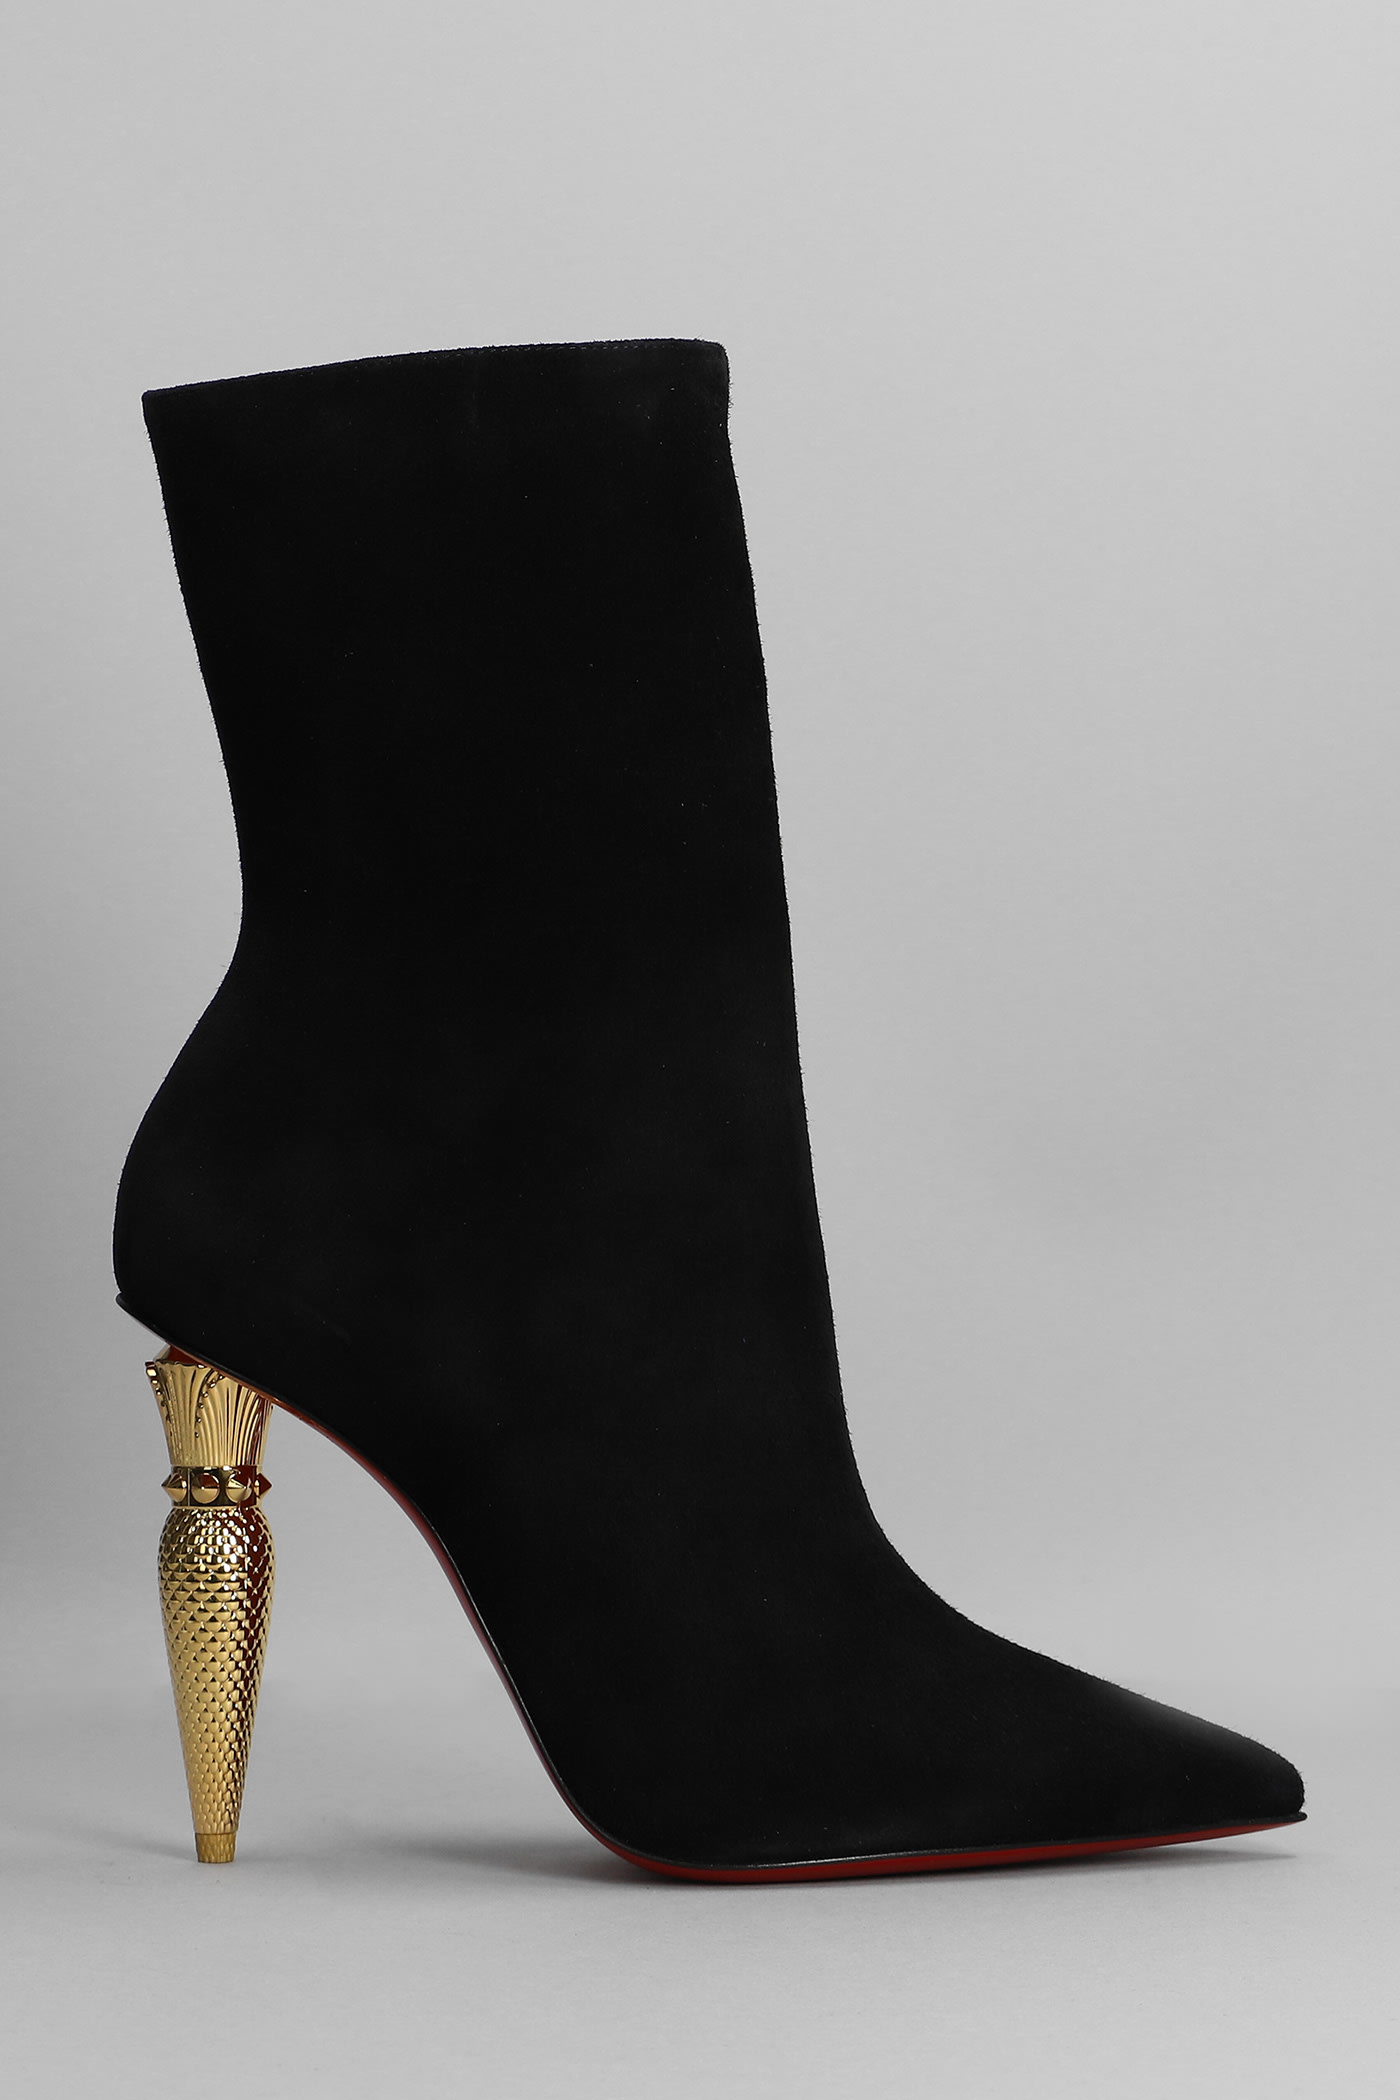 Christian Louboutin Lipbooty 100 High Heels Ankle Boots In Black Suede